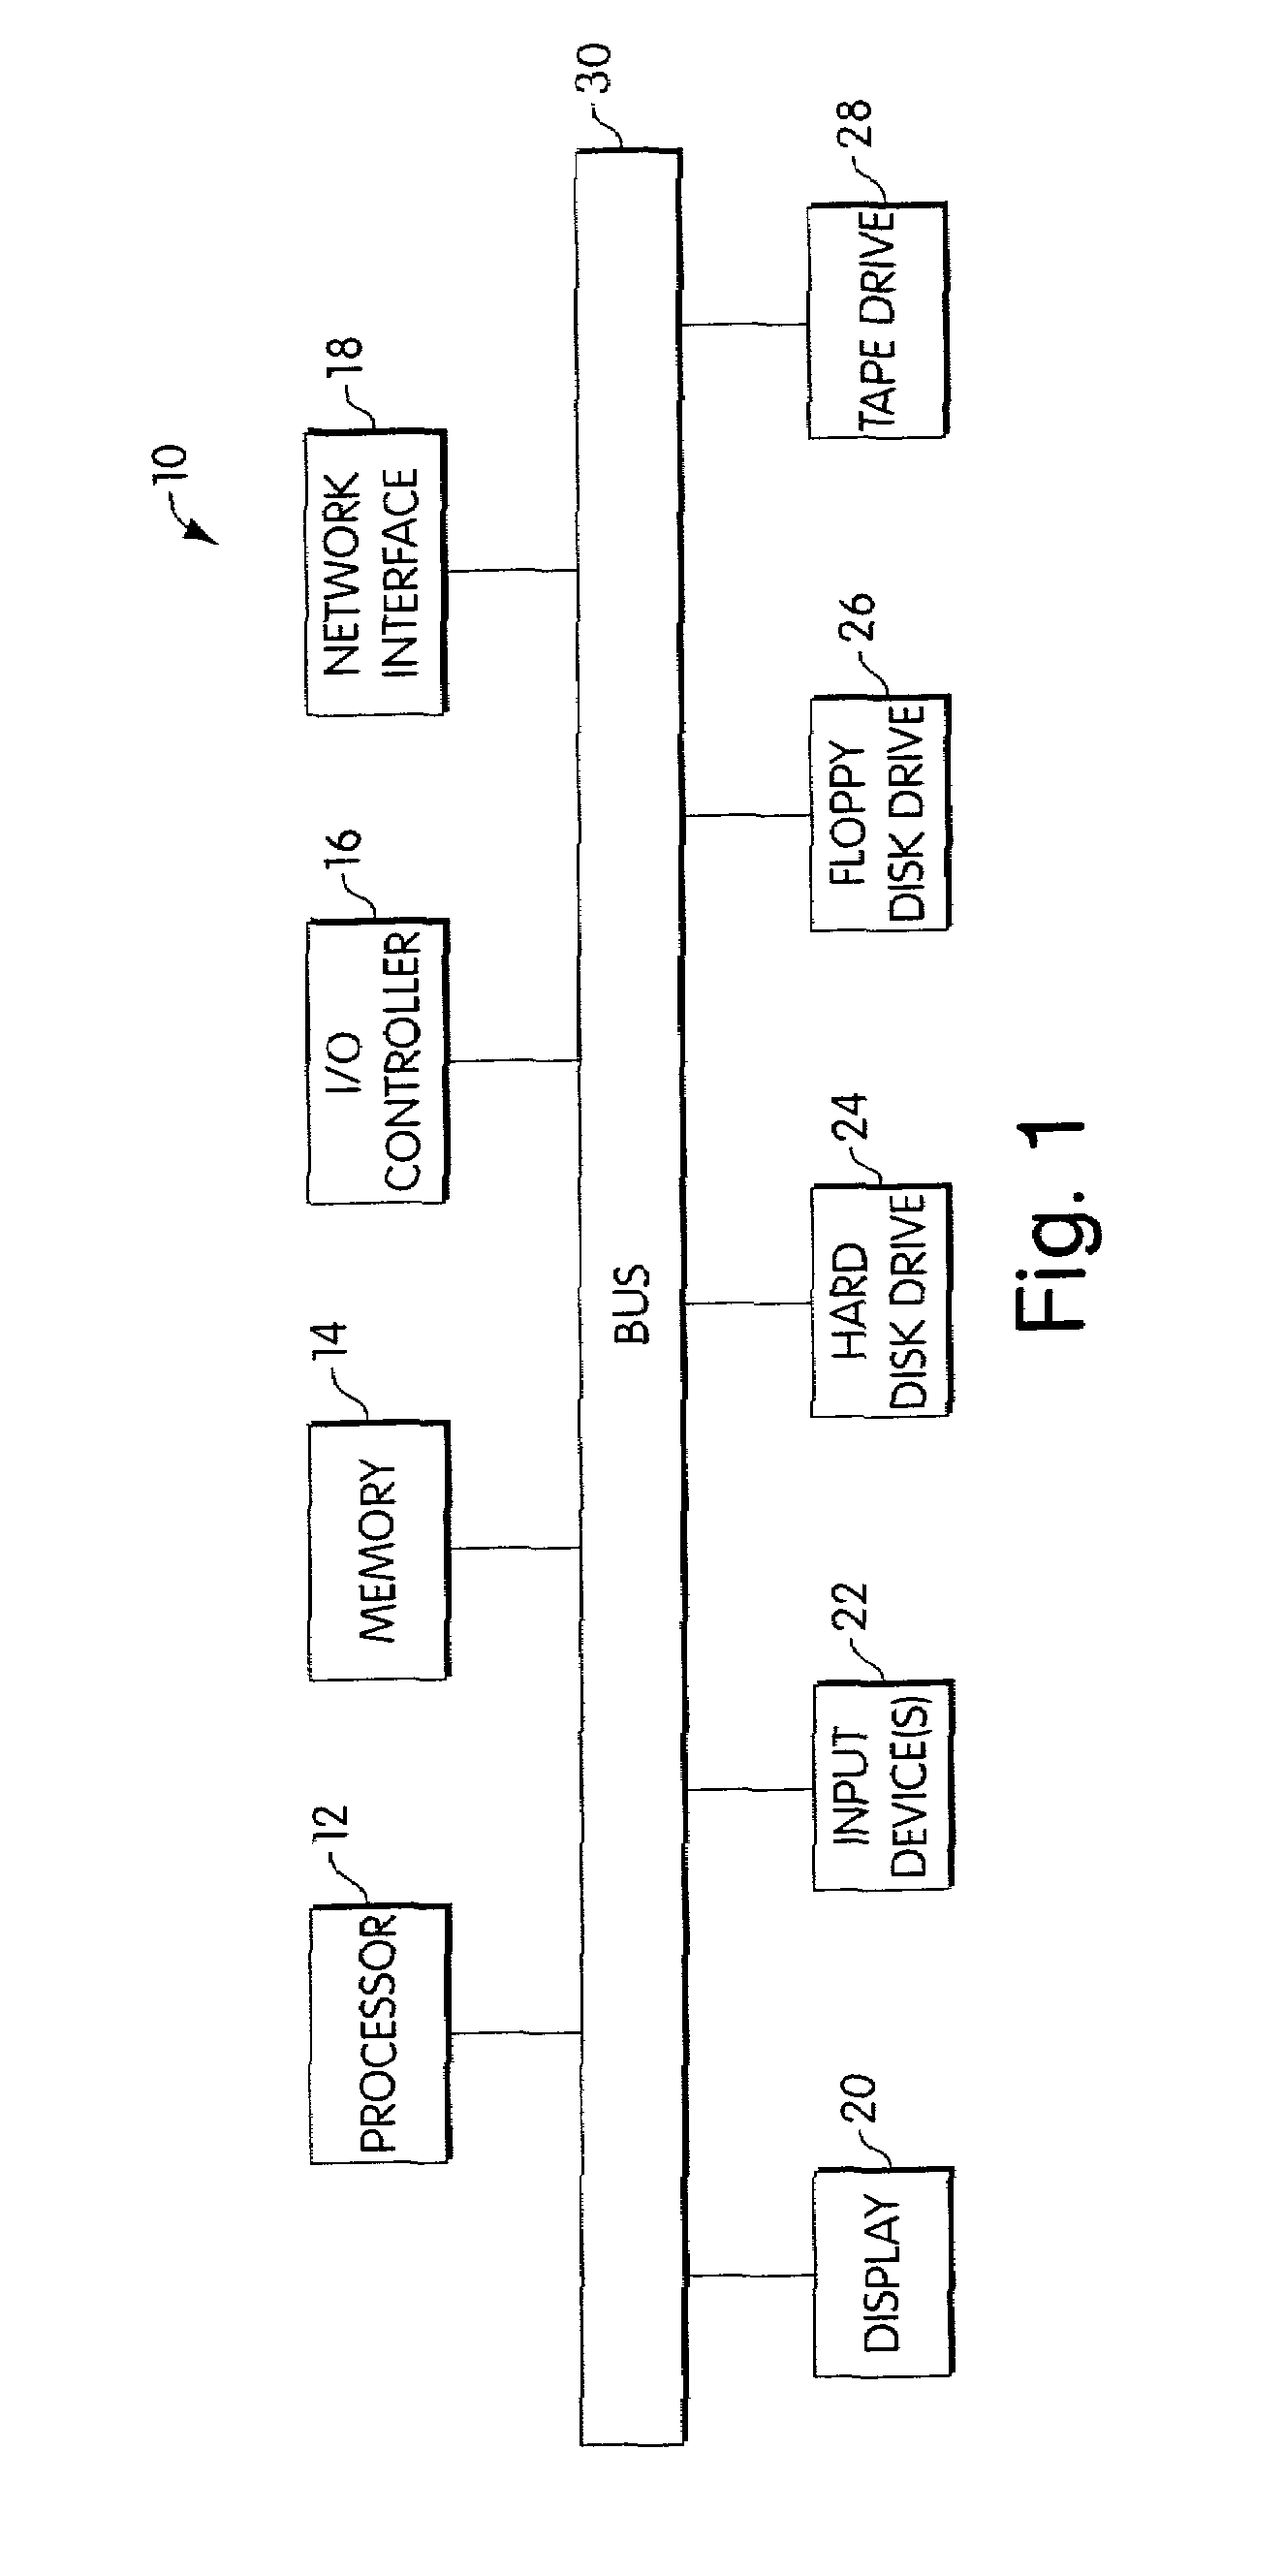 Systems and methods for distributing and viewing electronic documents